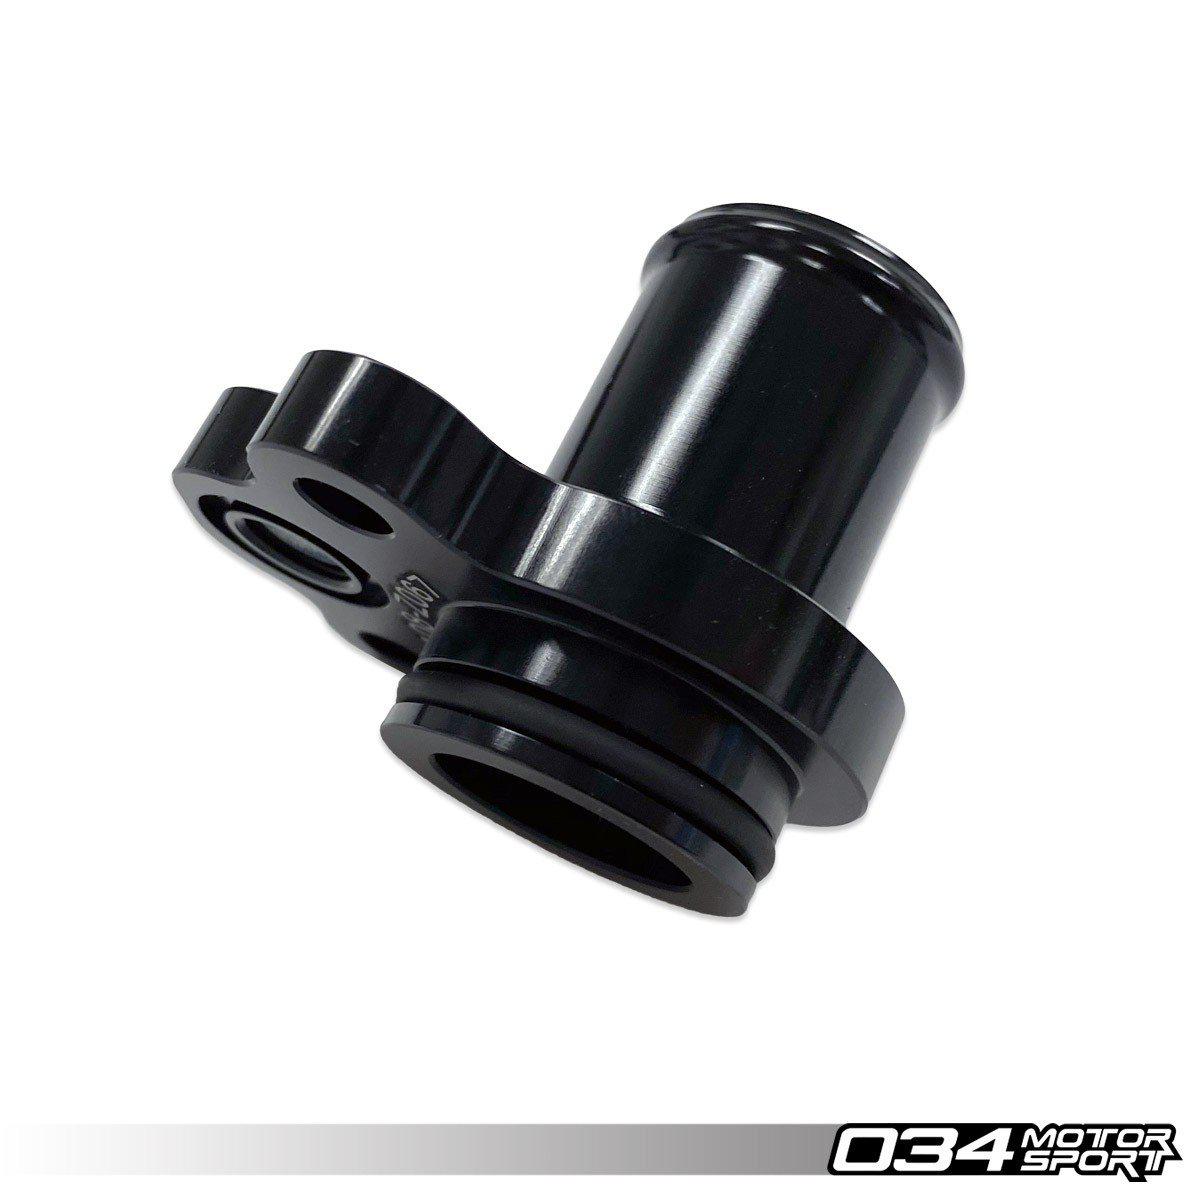 X34 Evo Intake Adapter For 2019+ Audi 8V.5 RS3 And 8S TTRS-A Little Tuning Co